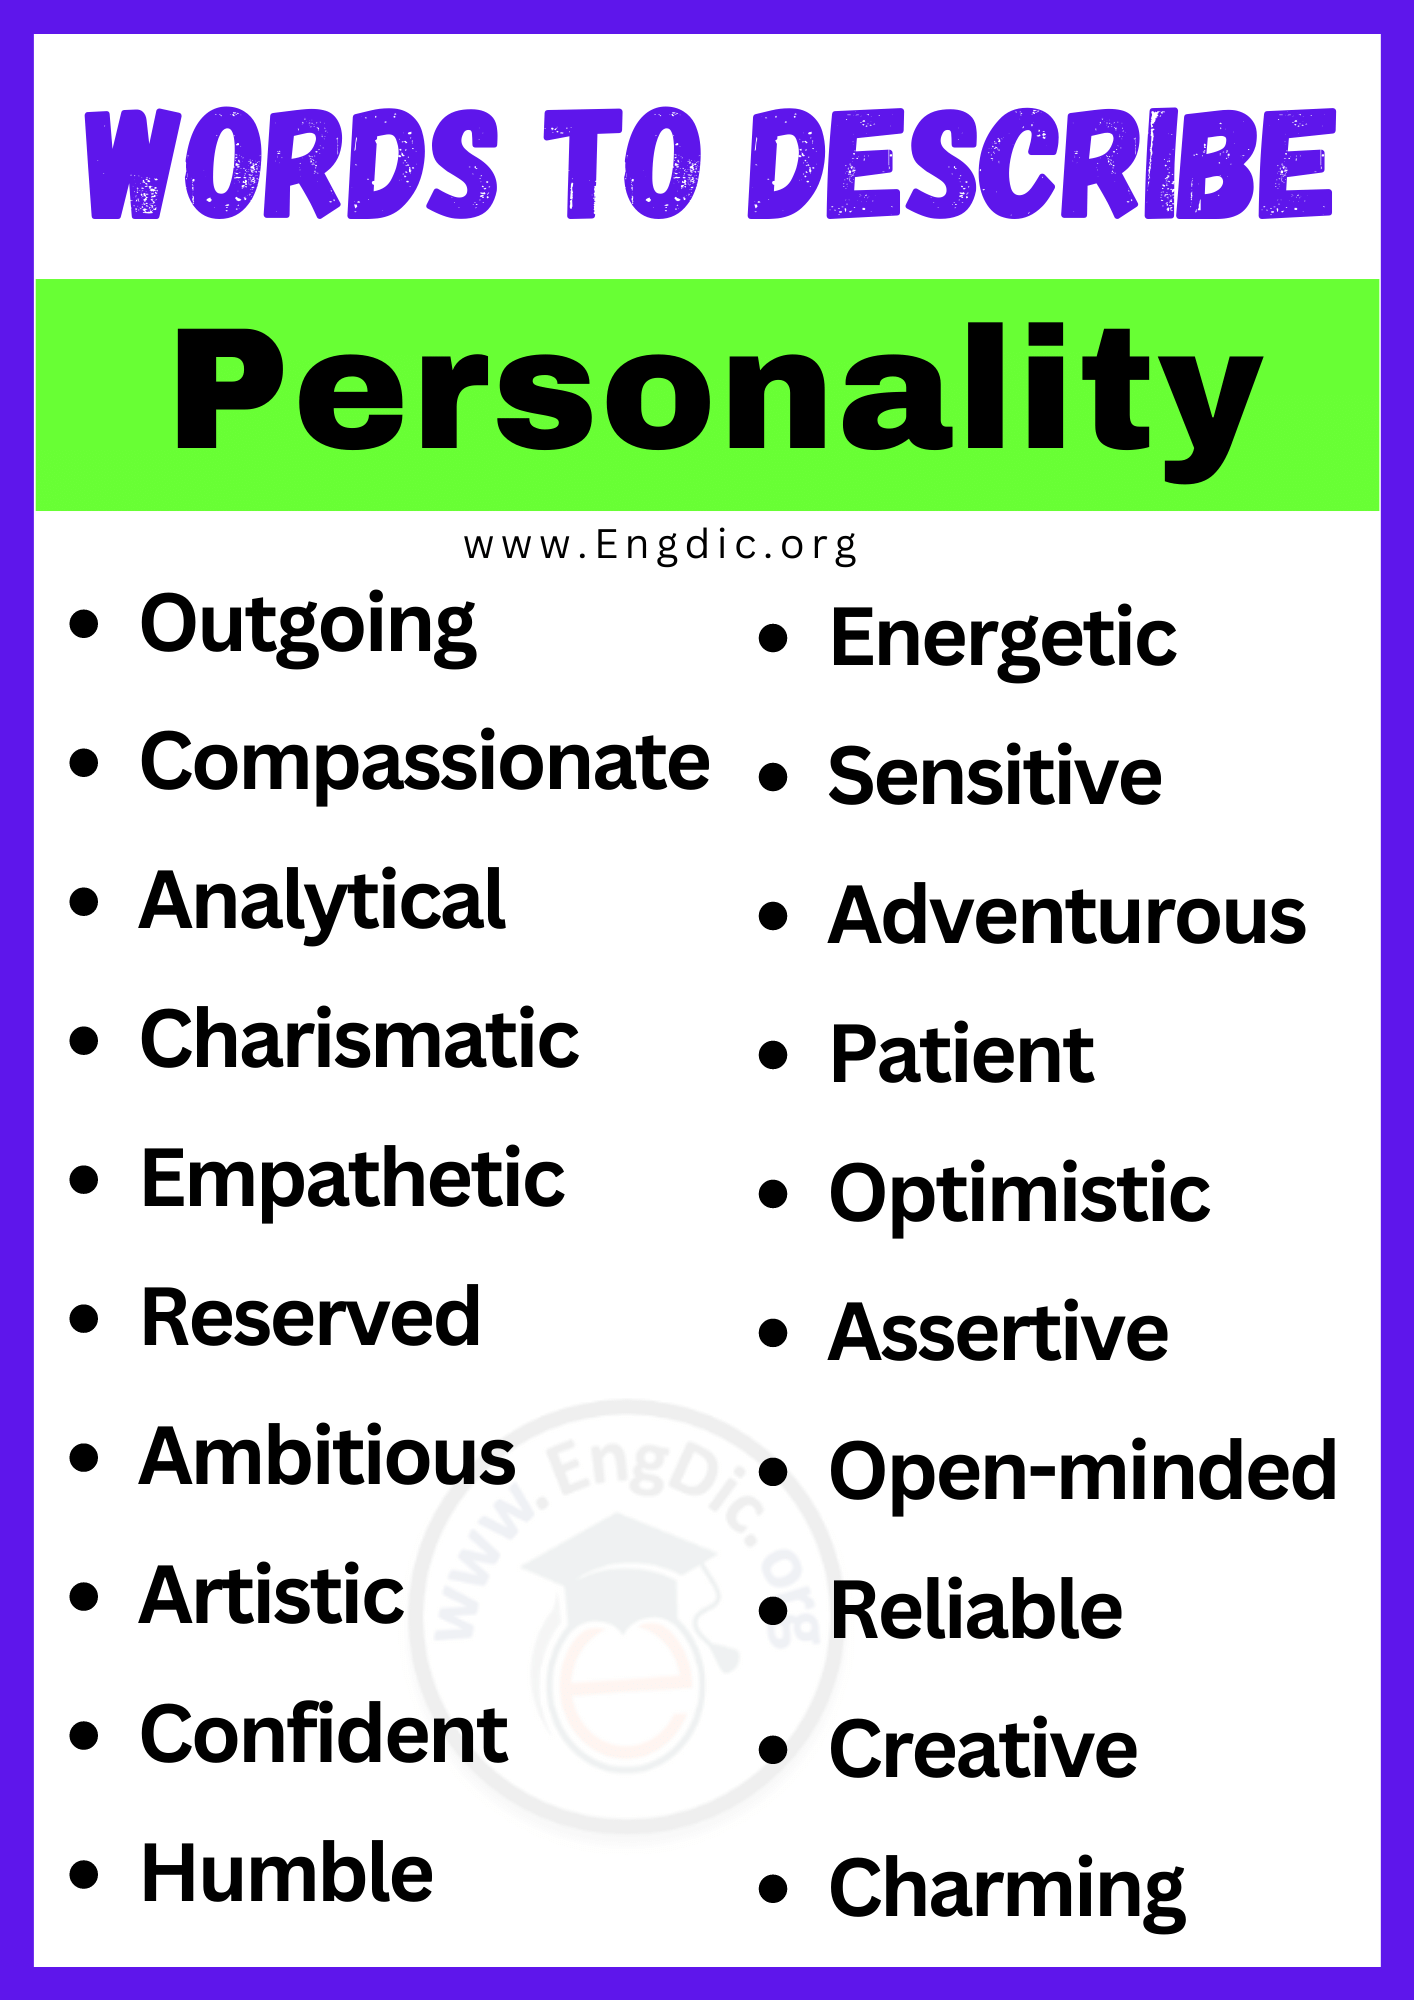 Words to Describe a Personality